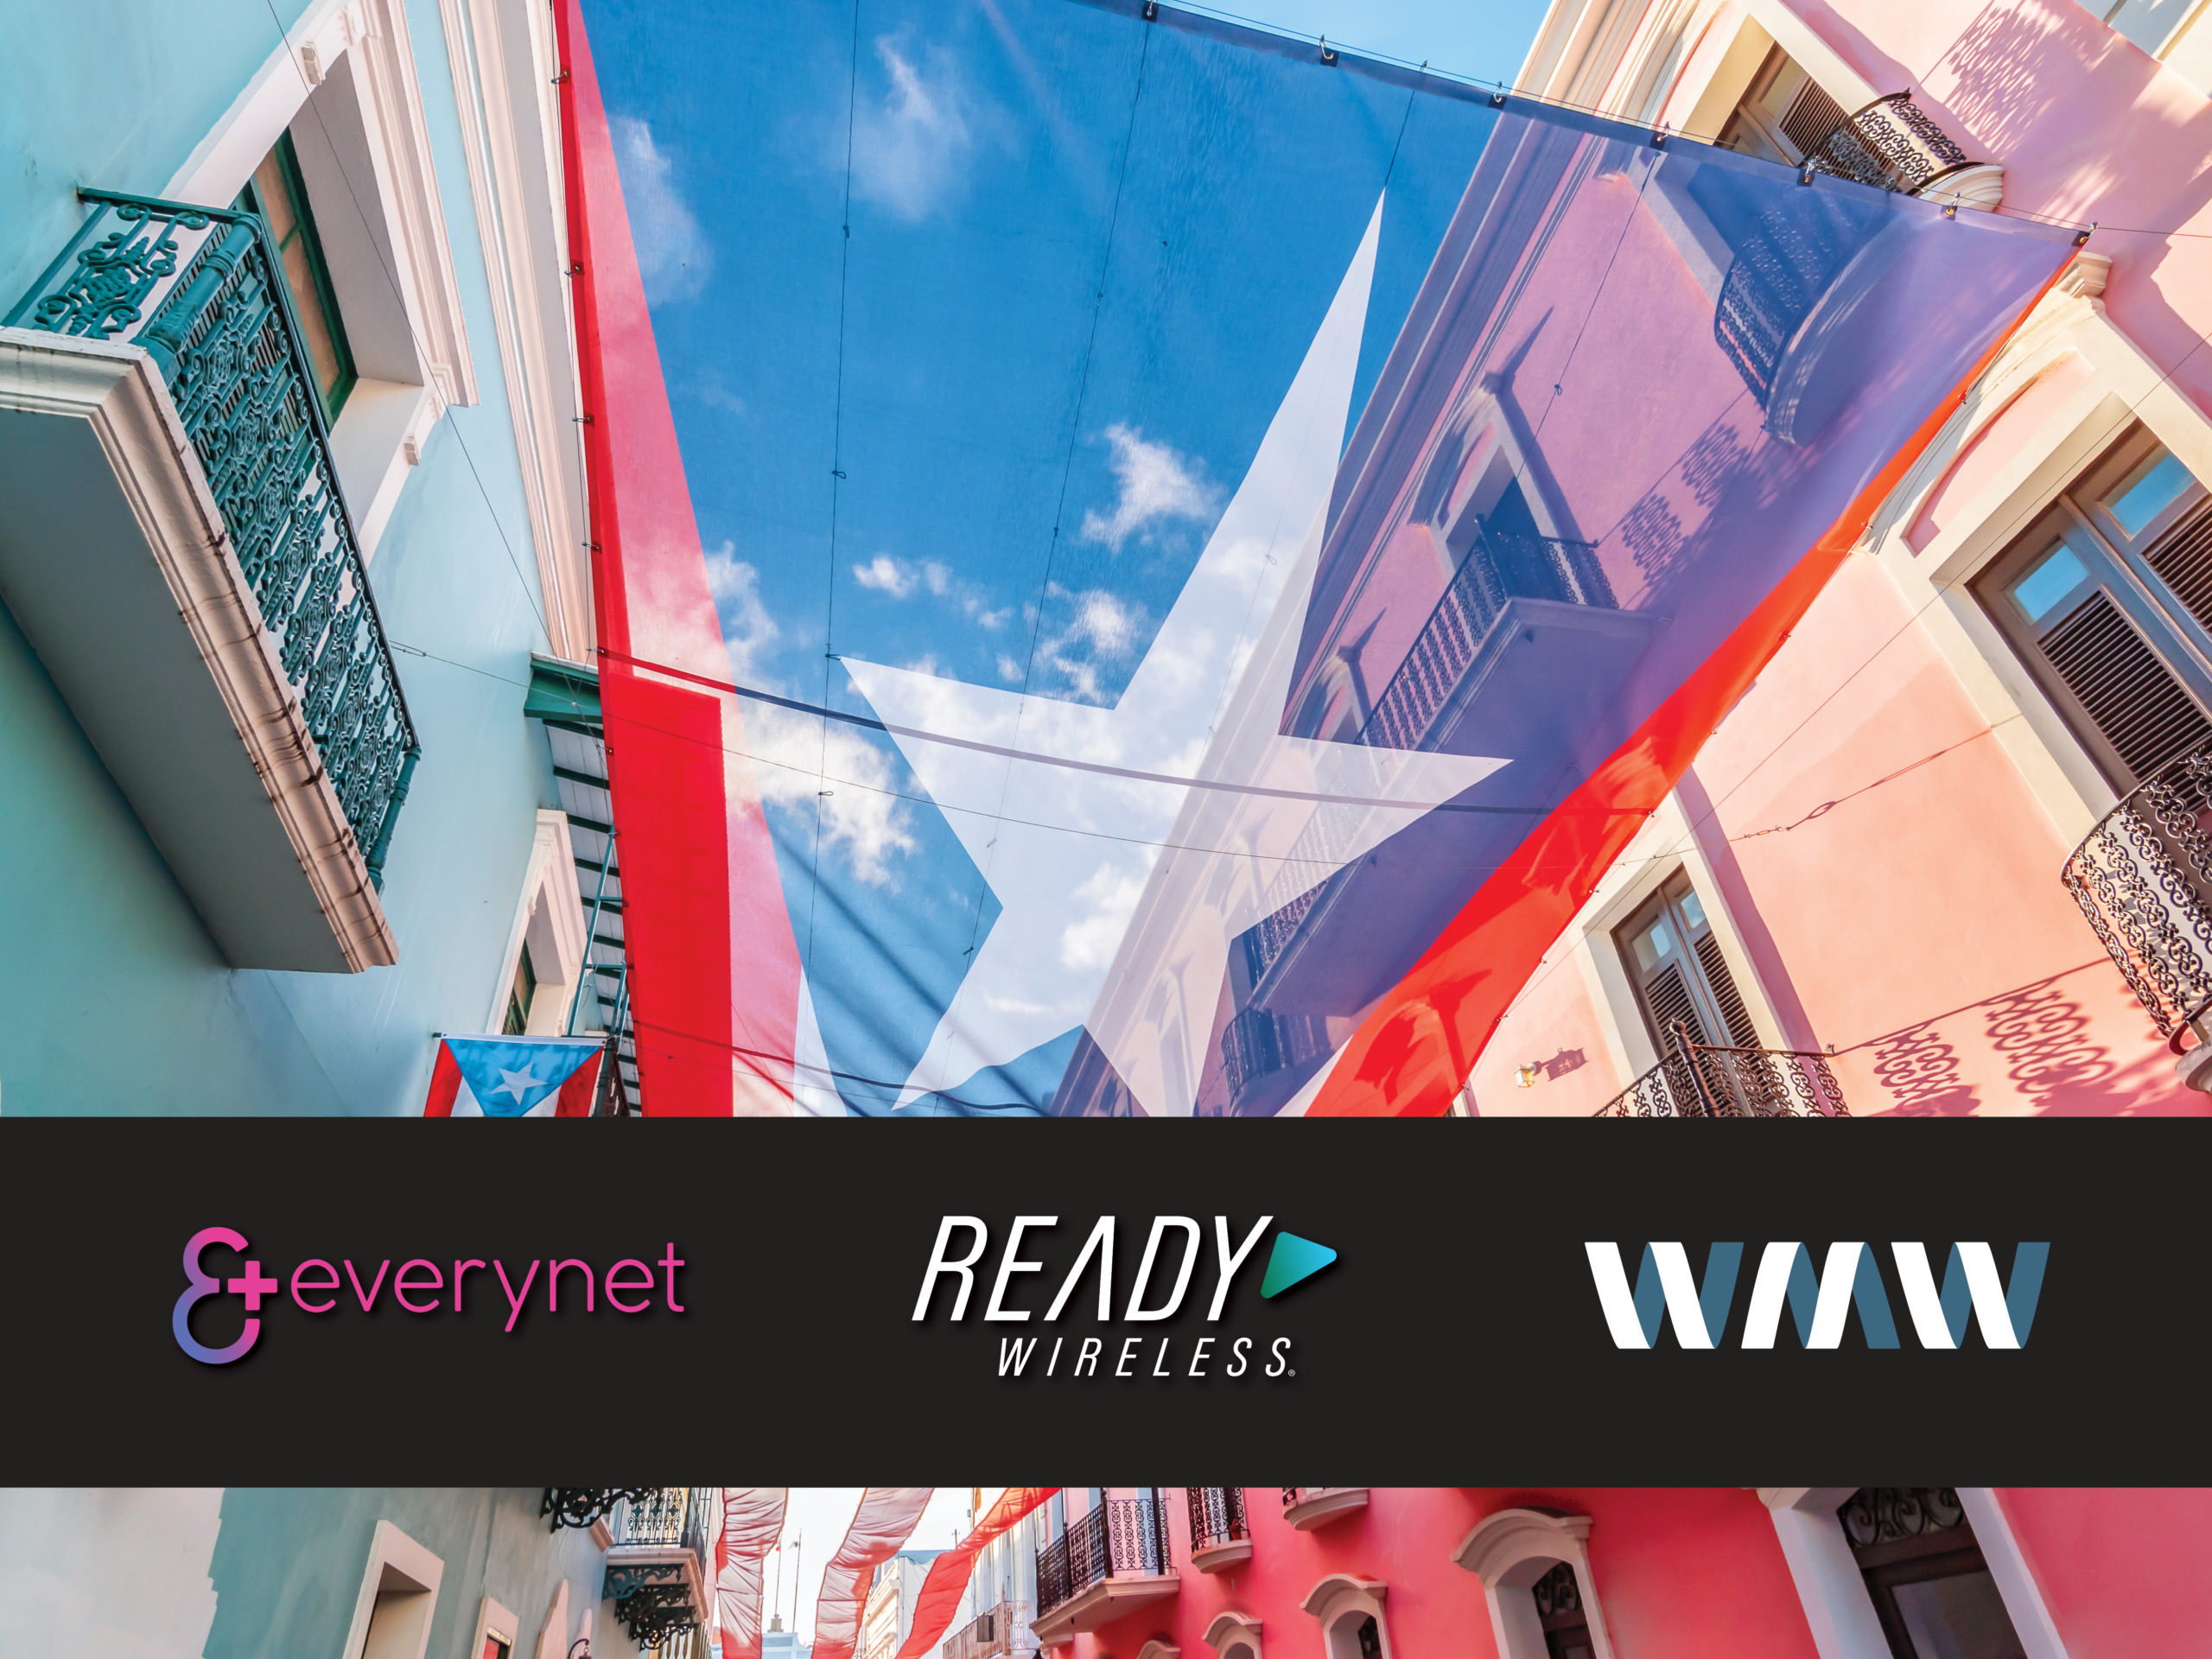 Image of San Juan Puerto Rico with Puerto Rican flag. Everynet, Ready Wireless, and WMW logos